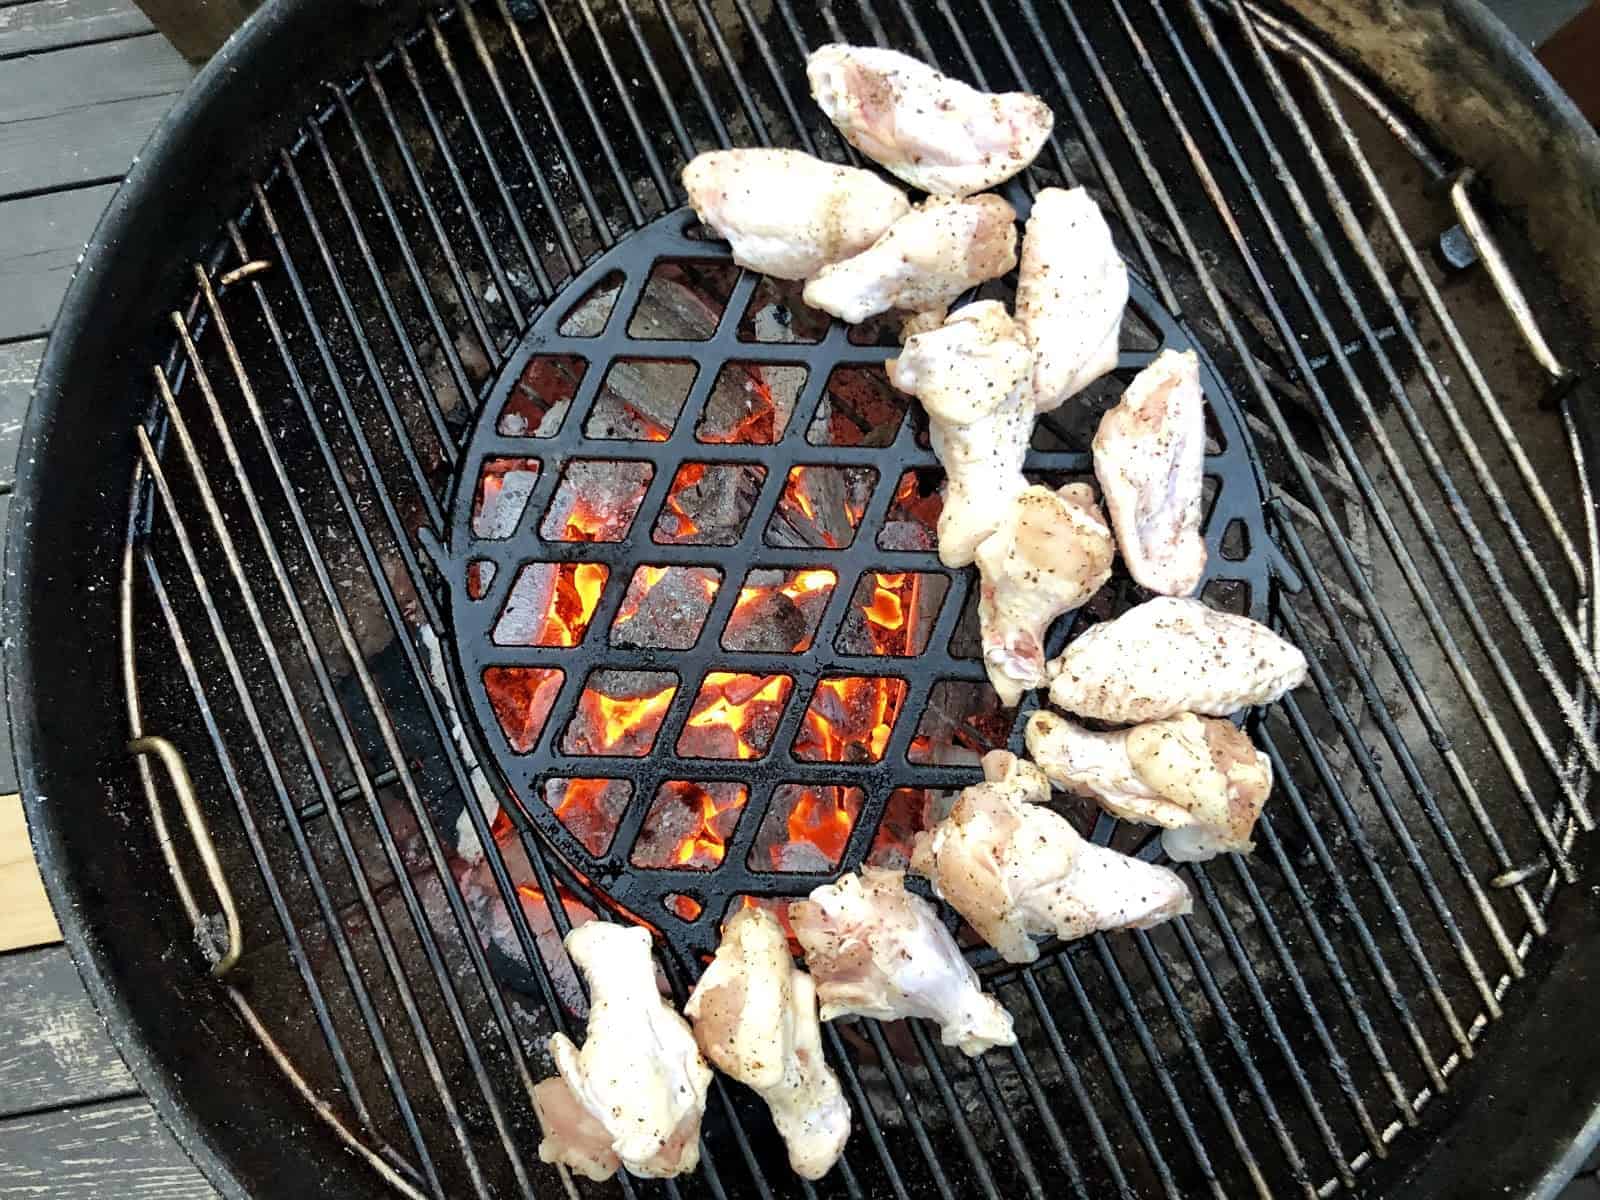 Wings over indirect heat on the grill.